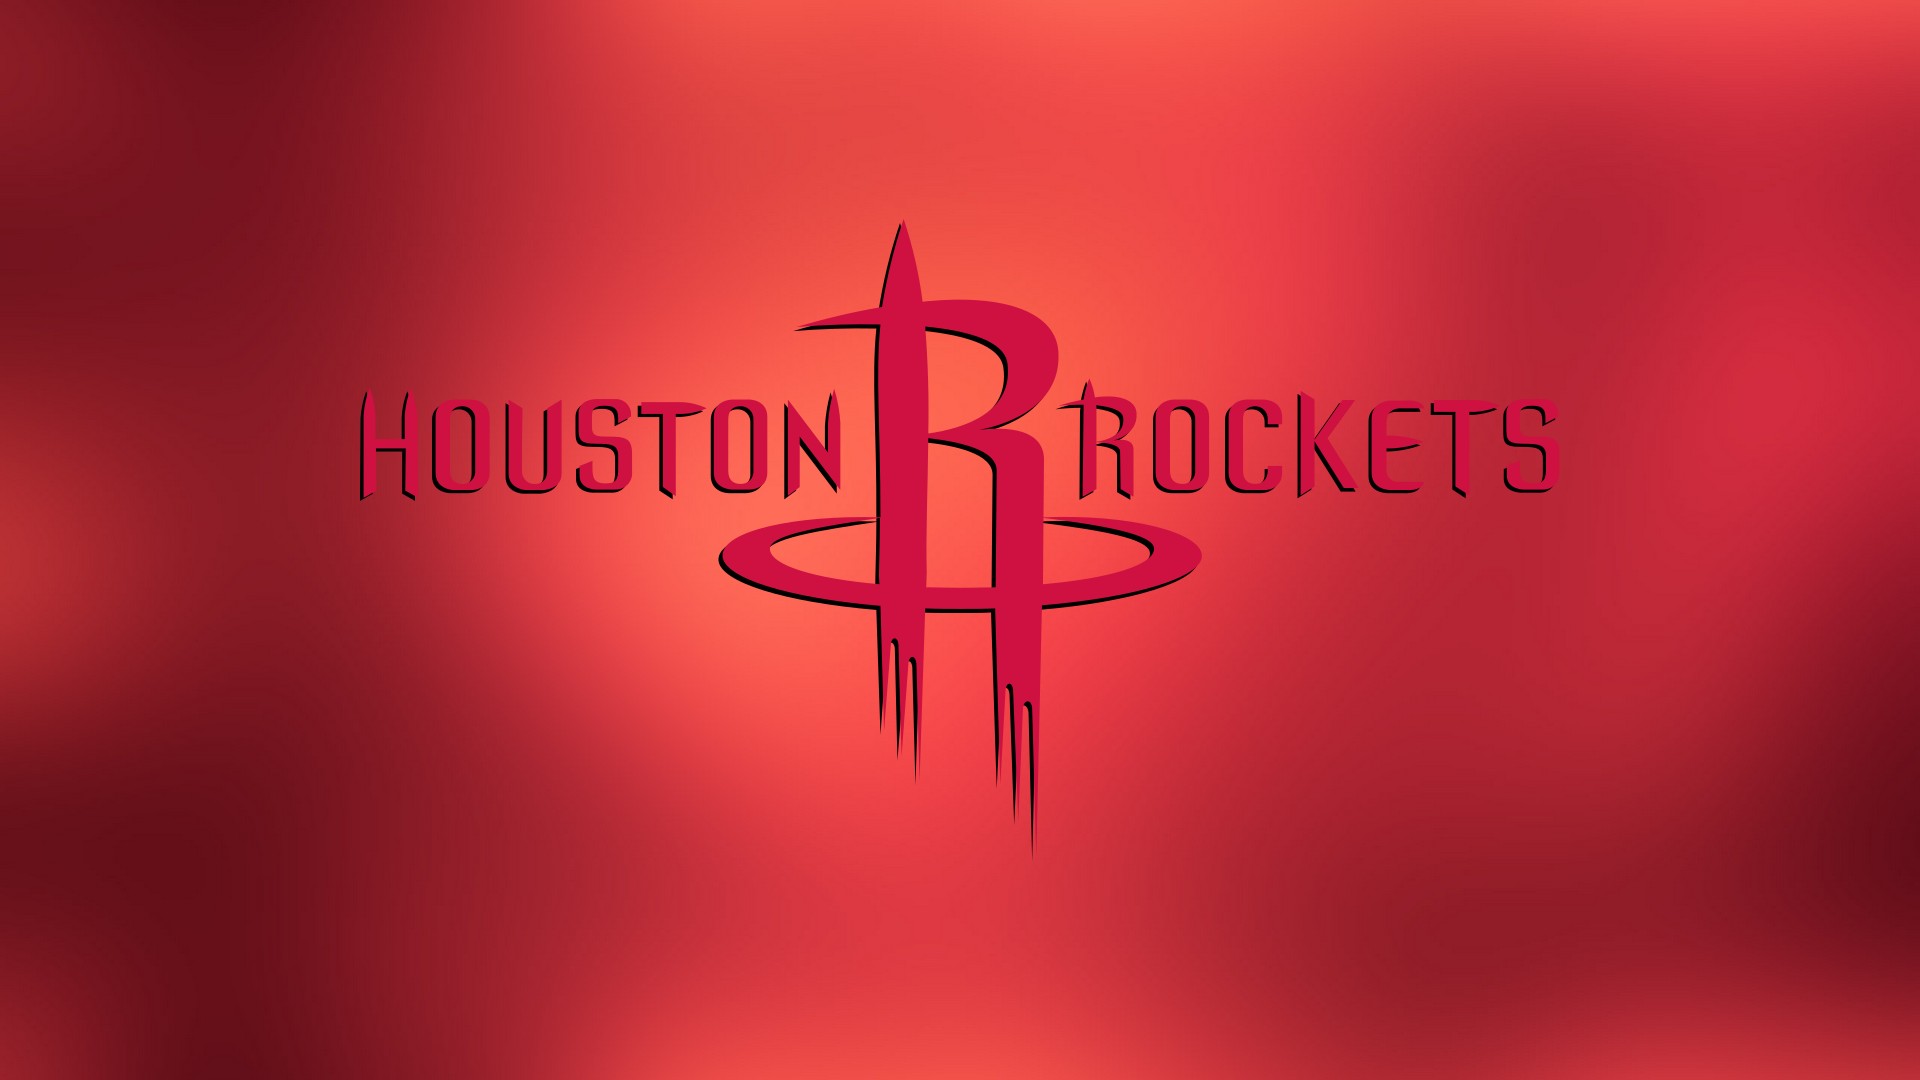 Wallpapers HD Houston Rockets with image dimensions 1920x1080 pixel. You can make this wallpaper for your Desktop Computer Backgrounds, Windows or Mac Screensavers, iPhone Lock screen, Tablet or Android and another Mobile Phone device